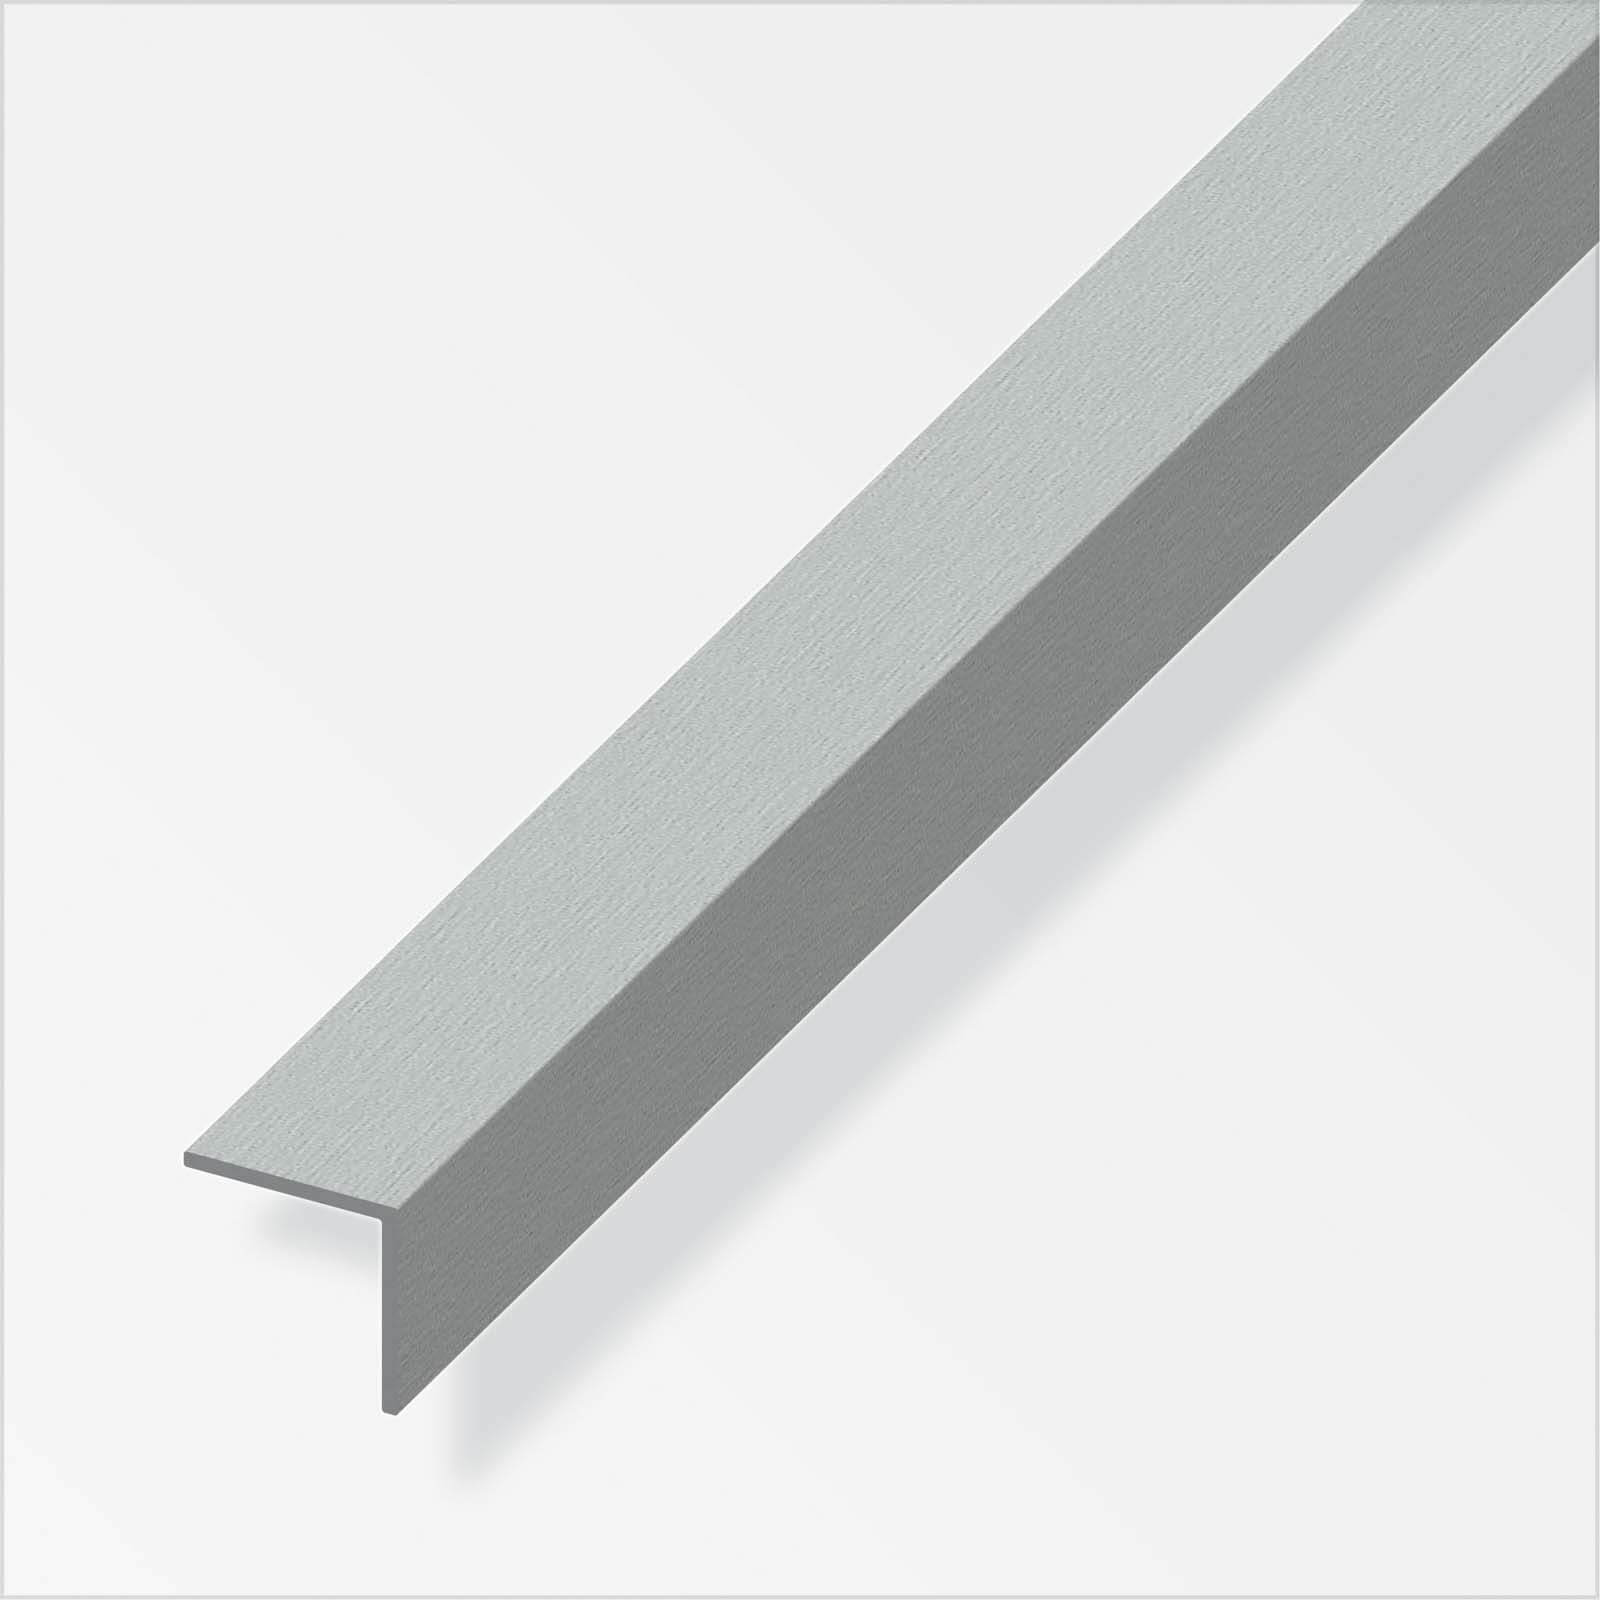 Aluminium Equal Angle Profile - Brushed Stainless Steel - 15mm x 15mm x 1m